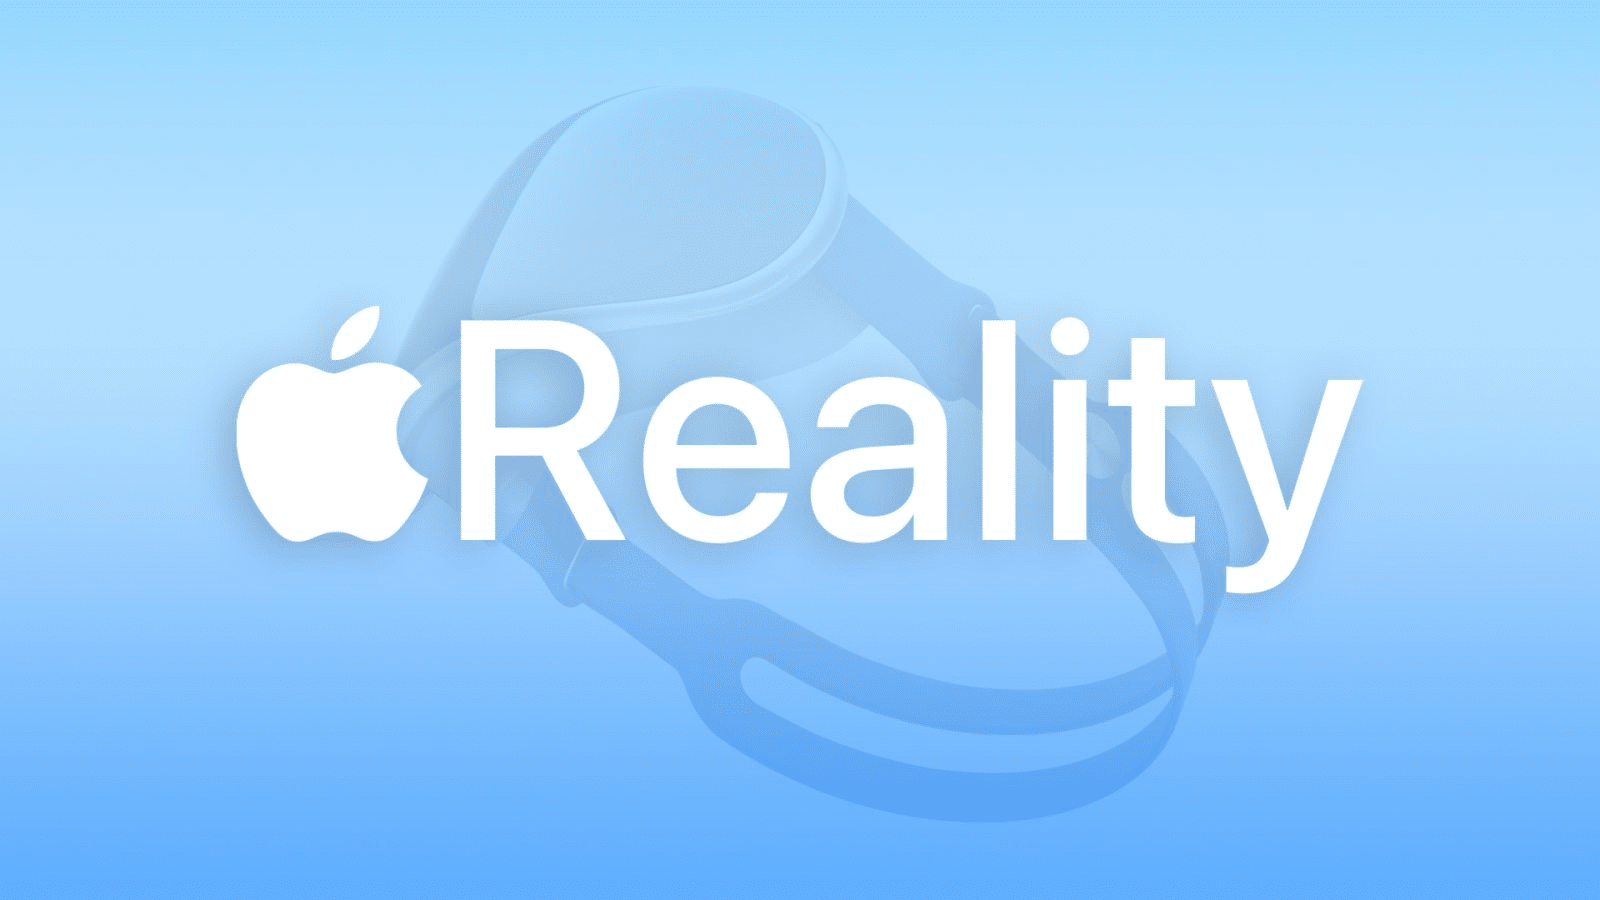 Apple to Reveal "xrOS" Software Platform Alongside Highly Anticipated "Reality Pro" Headset at WWDC.